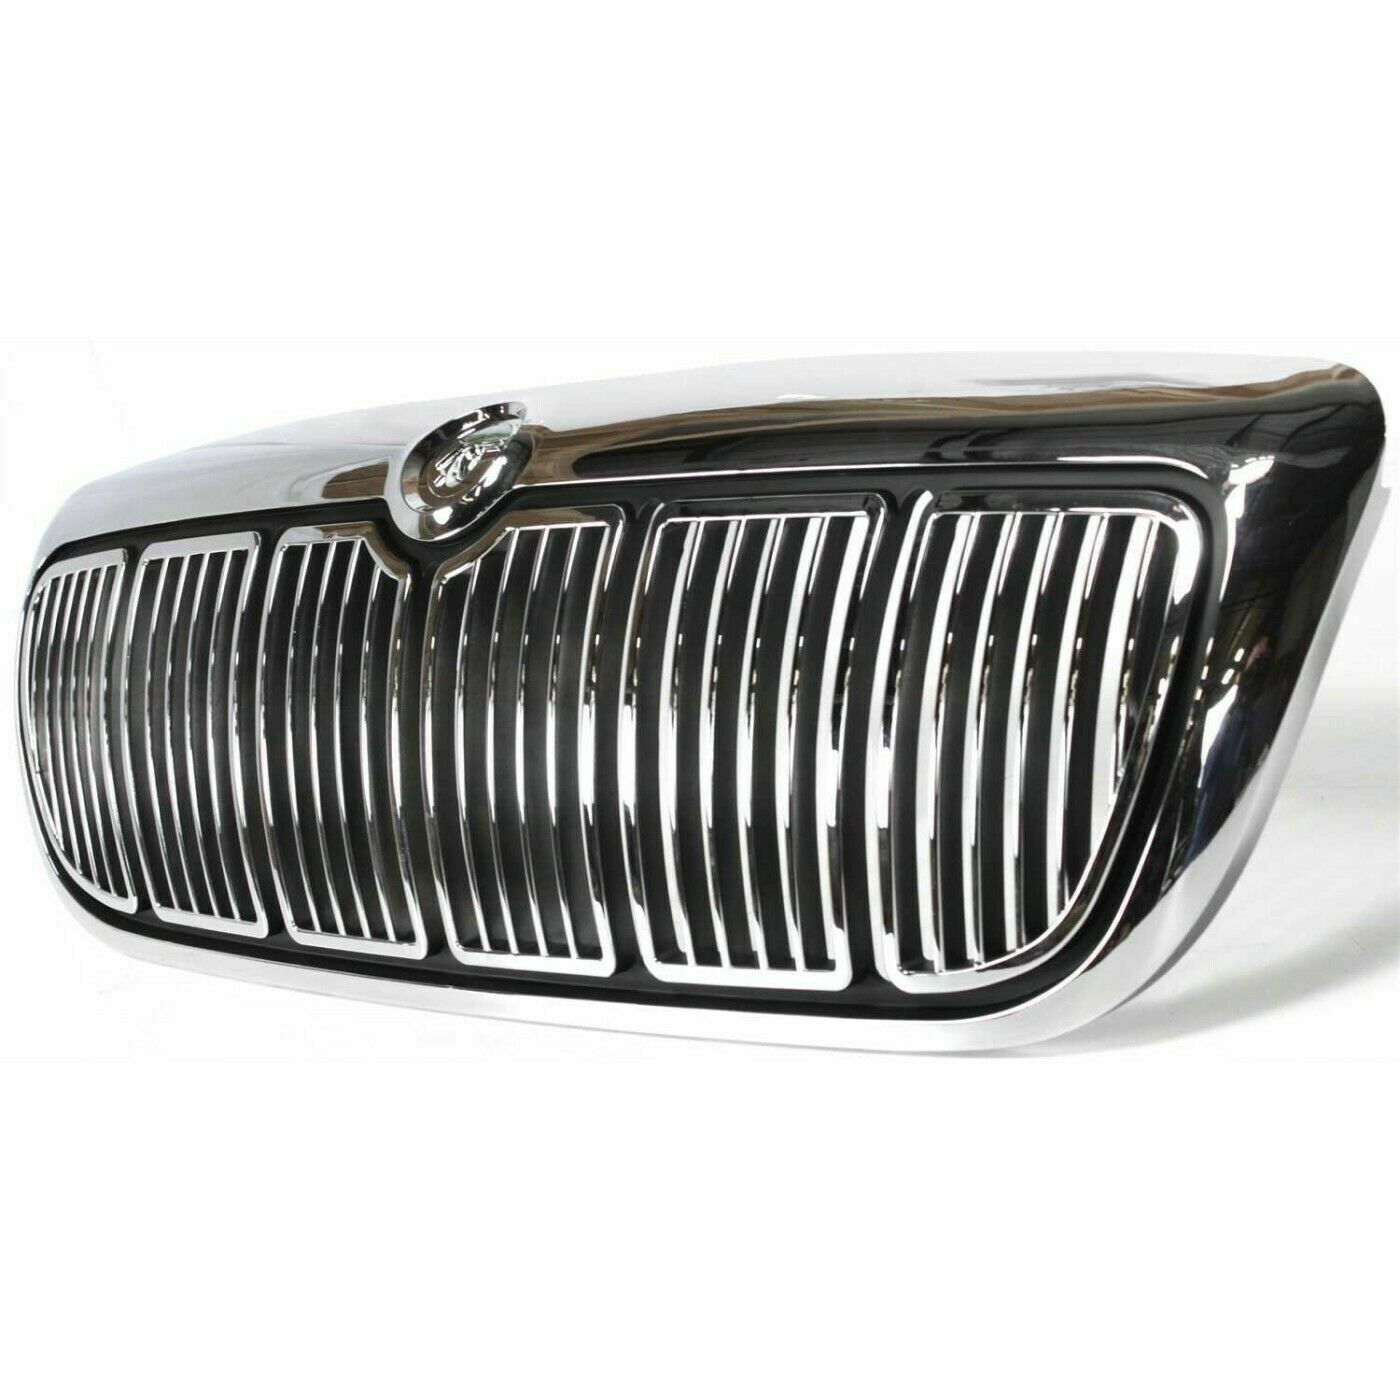 NEW Chrome Grille For 1998-2002 Mercury Grand Marquis FO1200353 SHIPS TODAY